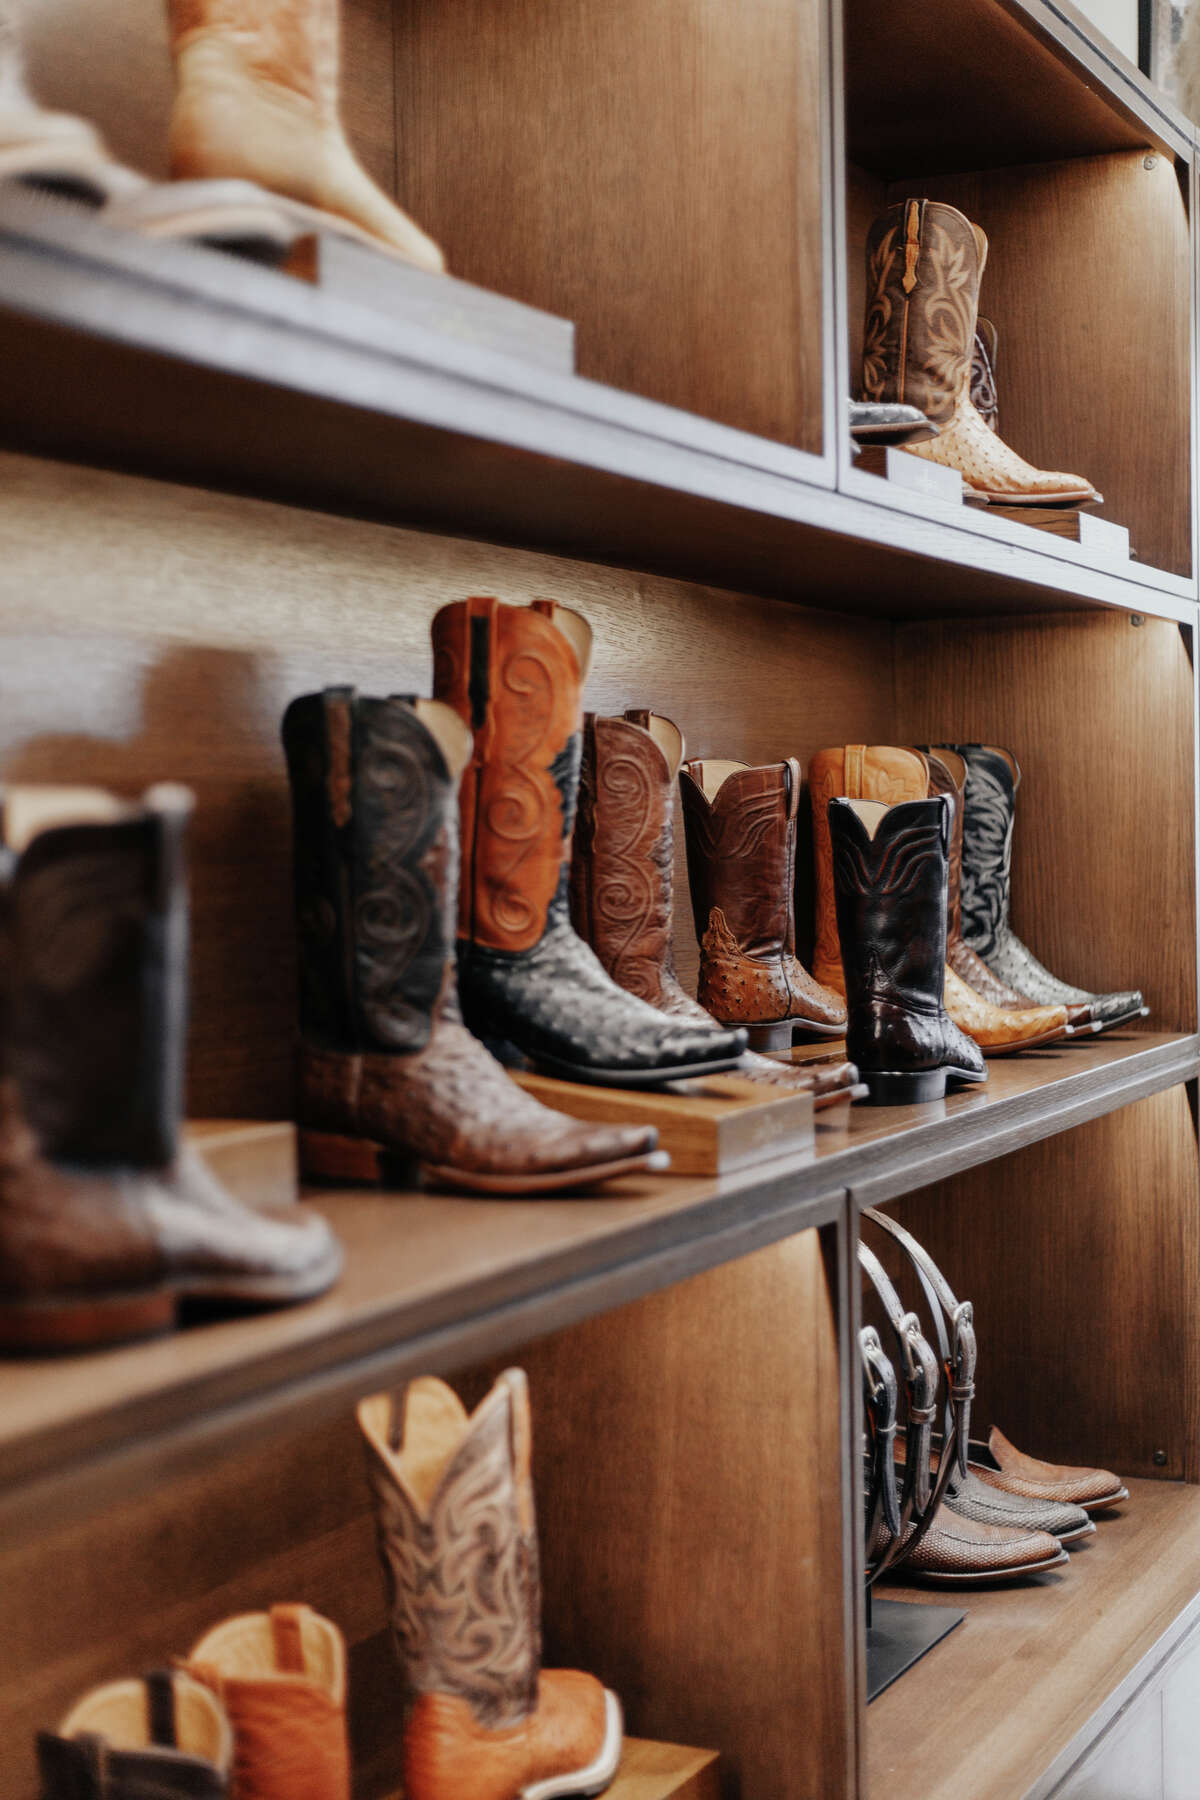 Lucchese, the storied Western company selling boots, shoes, apparel and accessories, has opened its first store in Midland at 2705 N. Big Spring St.